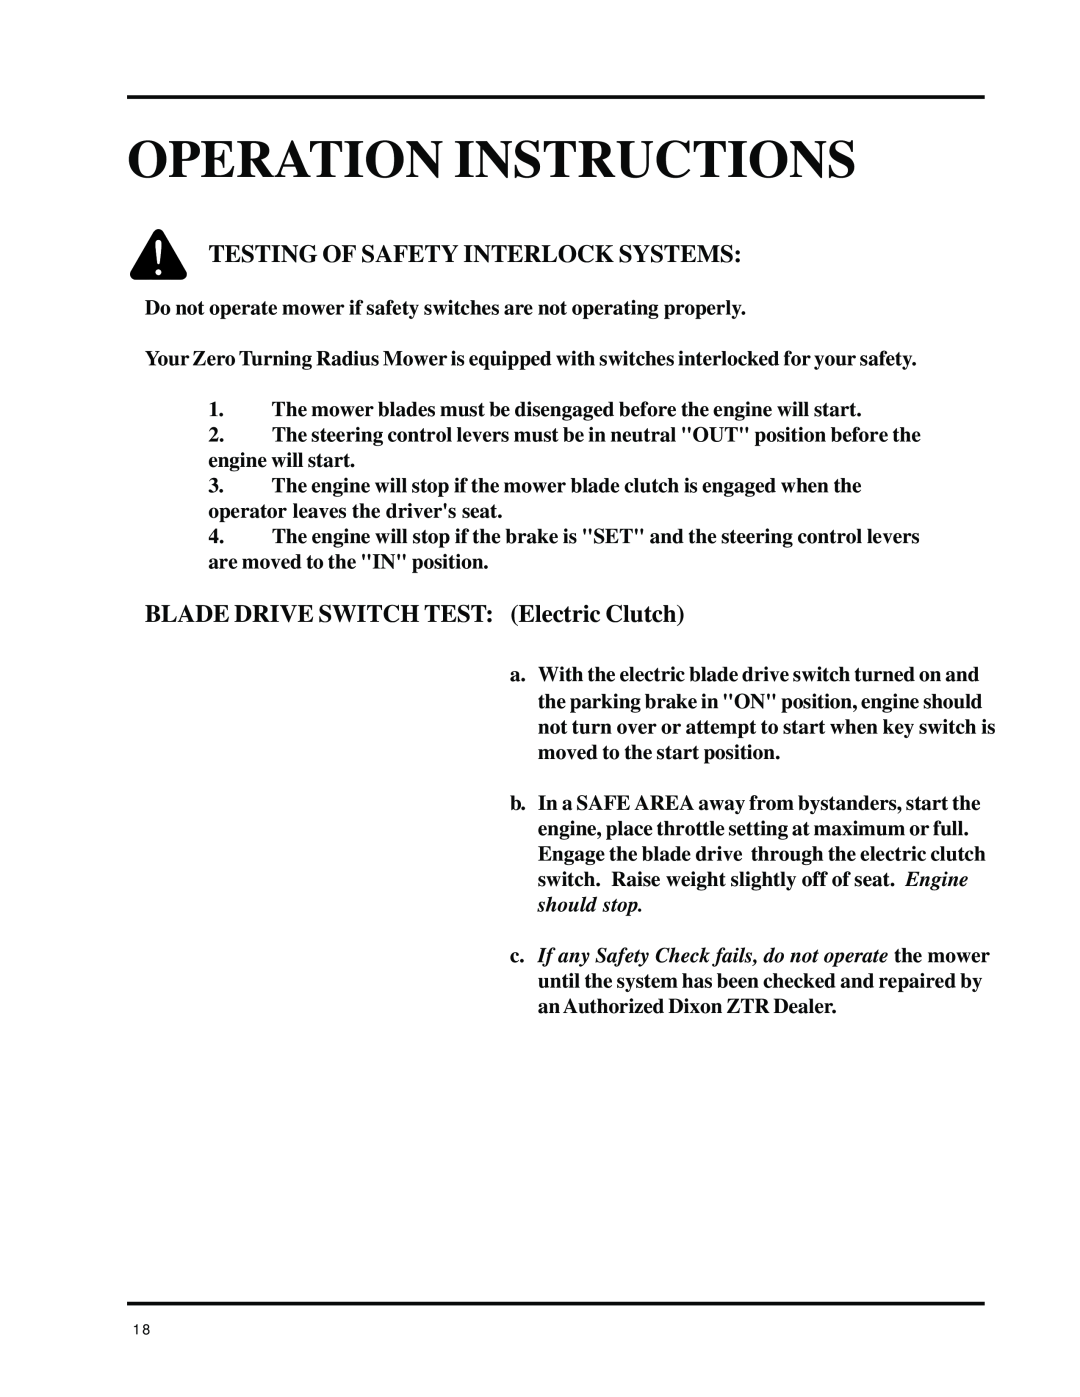 Dixon 8000 Series Operation Instructions, Testing Of Safety Interlock Systems, BLADE DRIVE SWITCH TEST Electric Clutch 